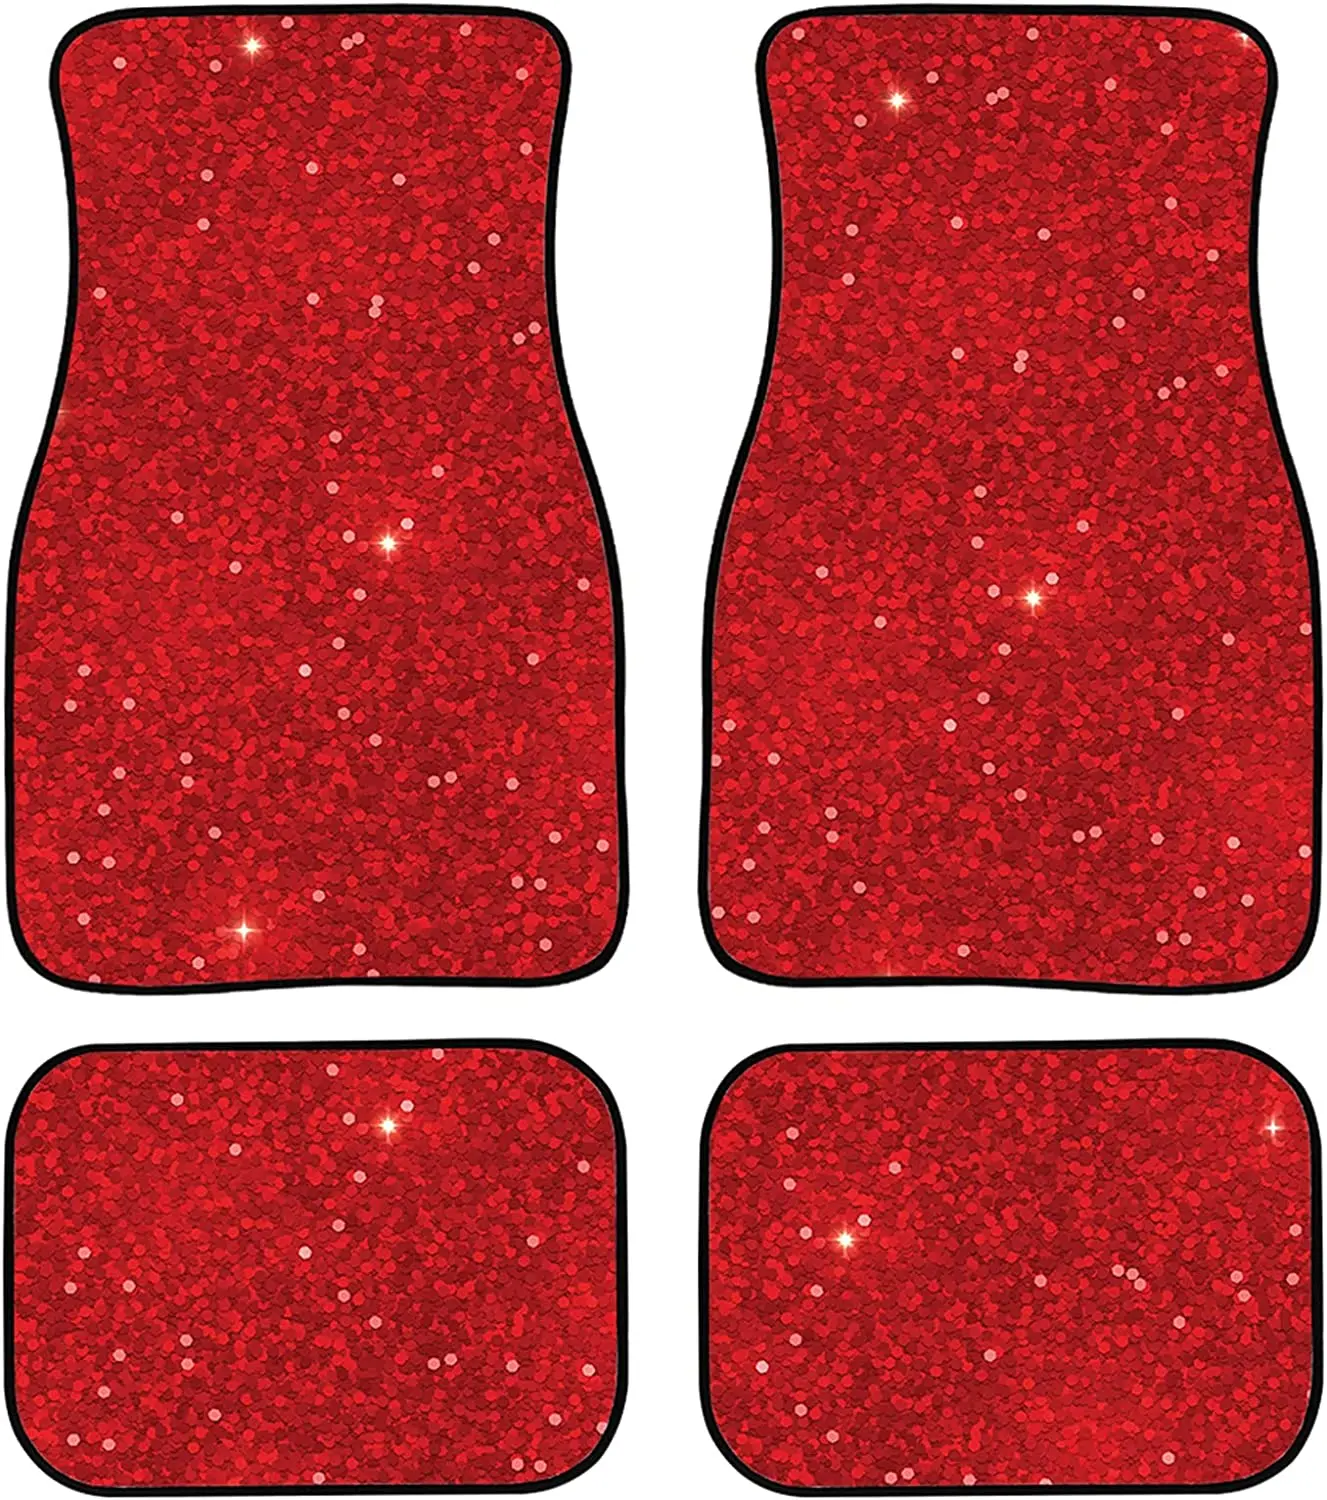 

Bling Print Fashion 4 Piece Cars Floor Mats Set for Women - Rubber-Lined All-Season Heavy-Duty Vehicle Floor Protection Carpet